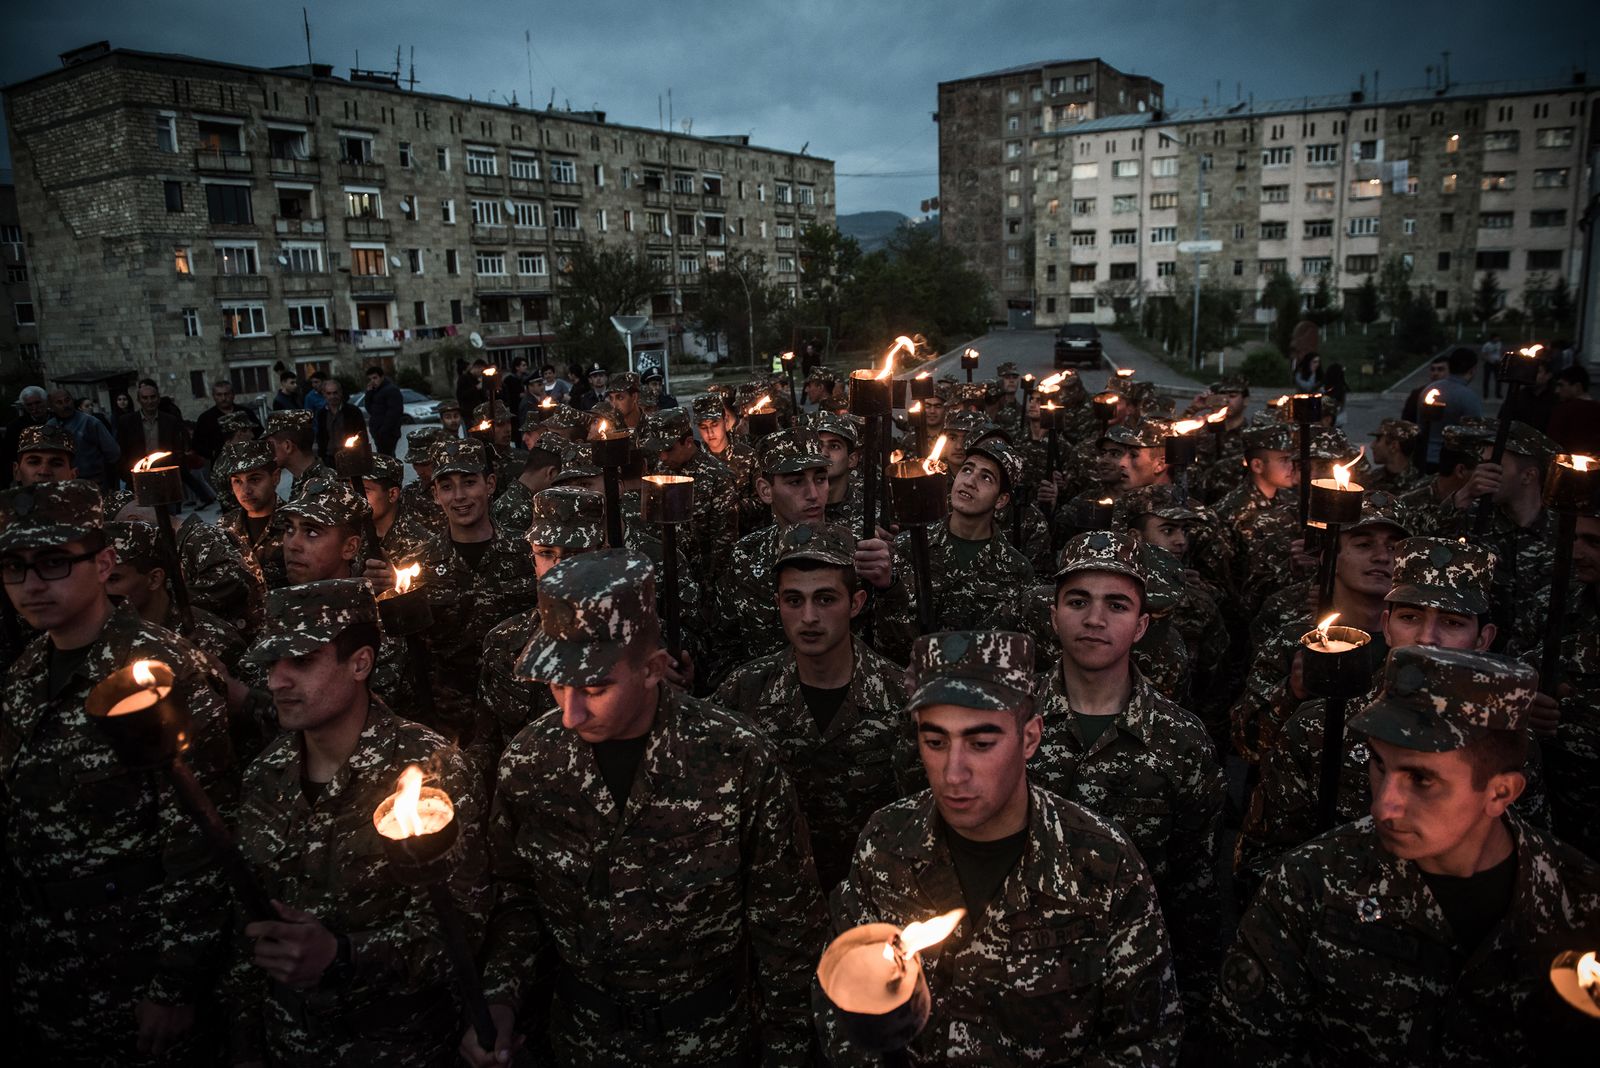 © Mattia Vacca - Image from the The forgotten war of Nagorno Karabakh photography project